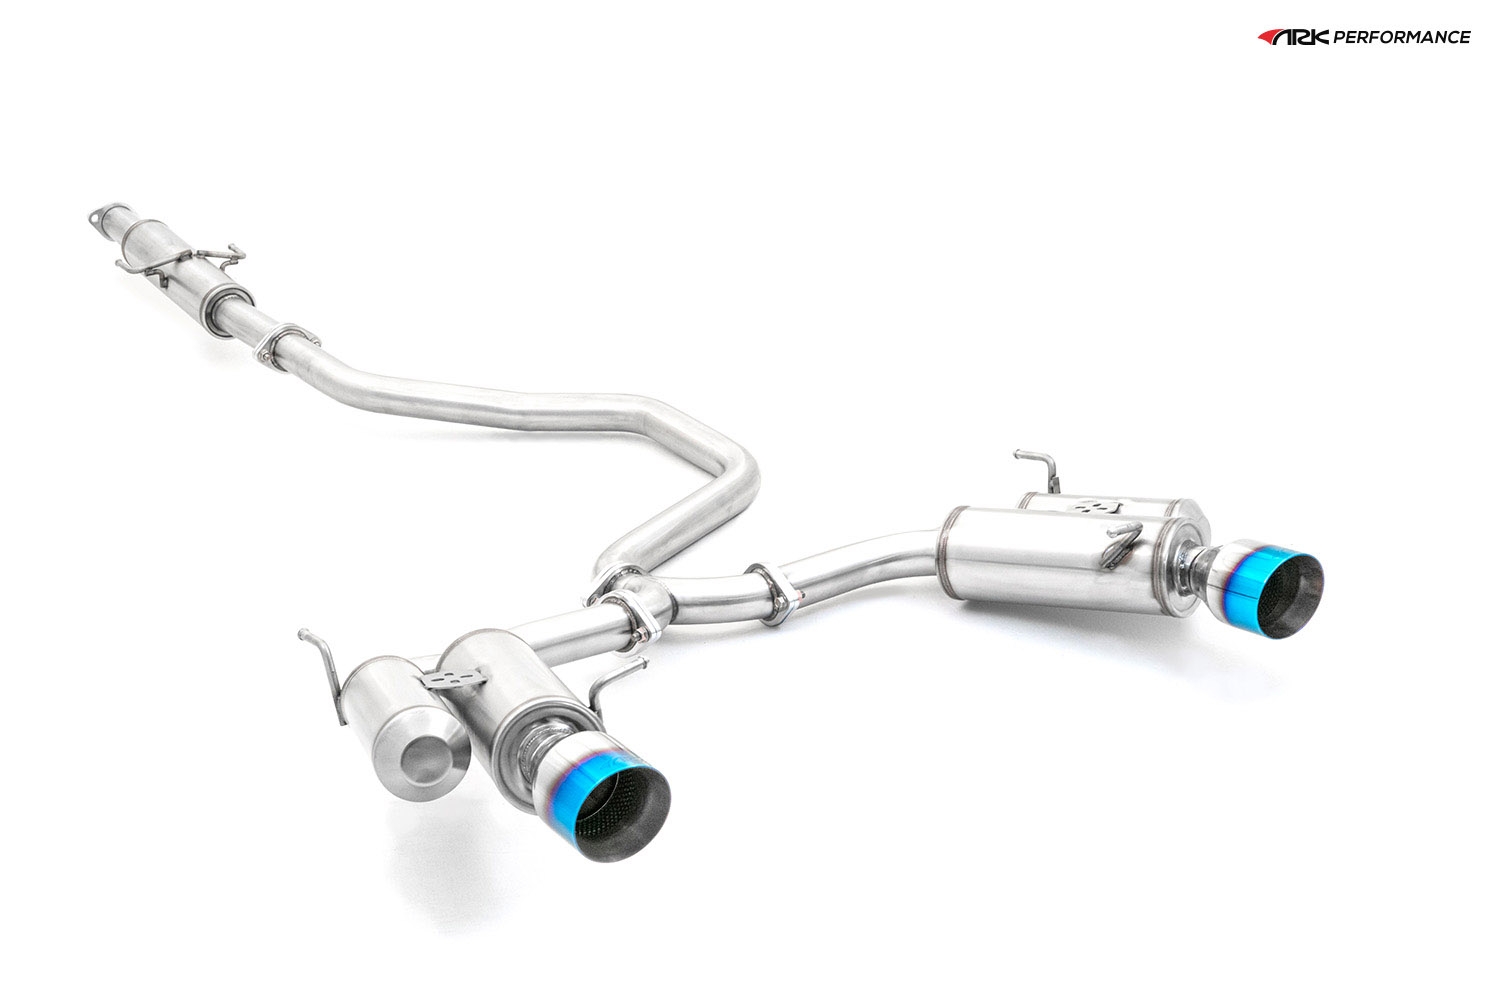 Ark Performance Stainless Steel DT-S Cat-Back Exhaust System 2.5in Pipe w/ 4.5 Burnt Single Tip, Dual Exit - Hyundai Tiburon 03-08 2.0L I4, 2.7L V6 GK